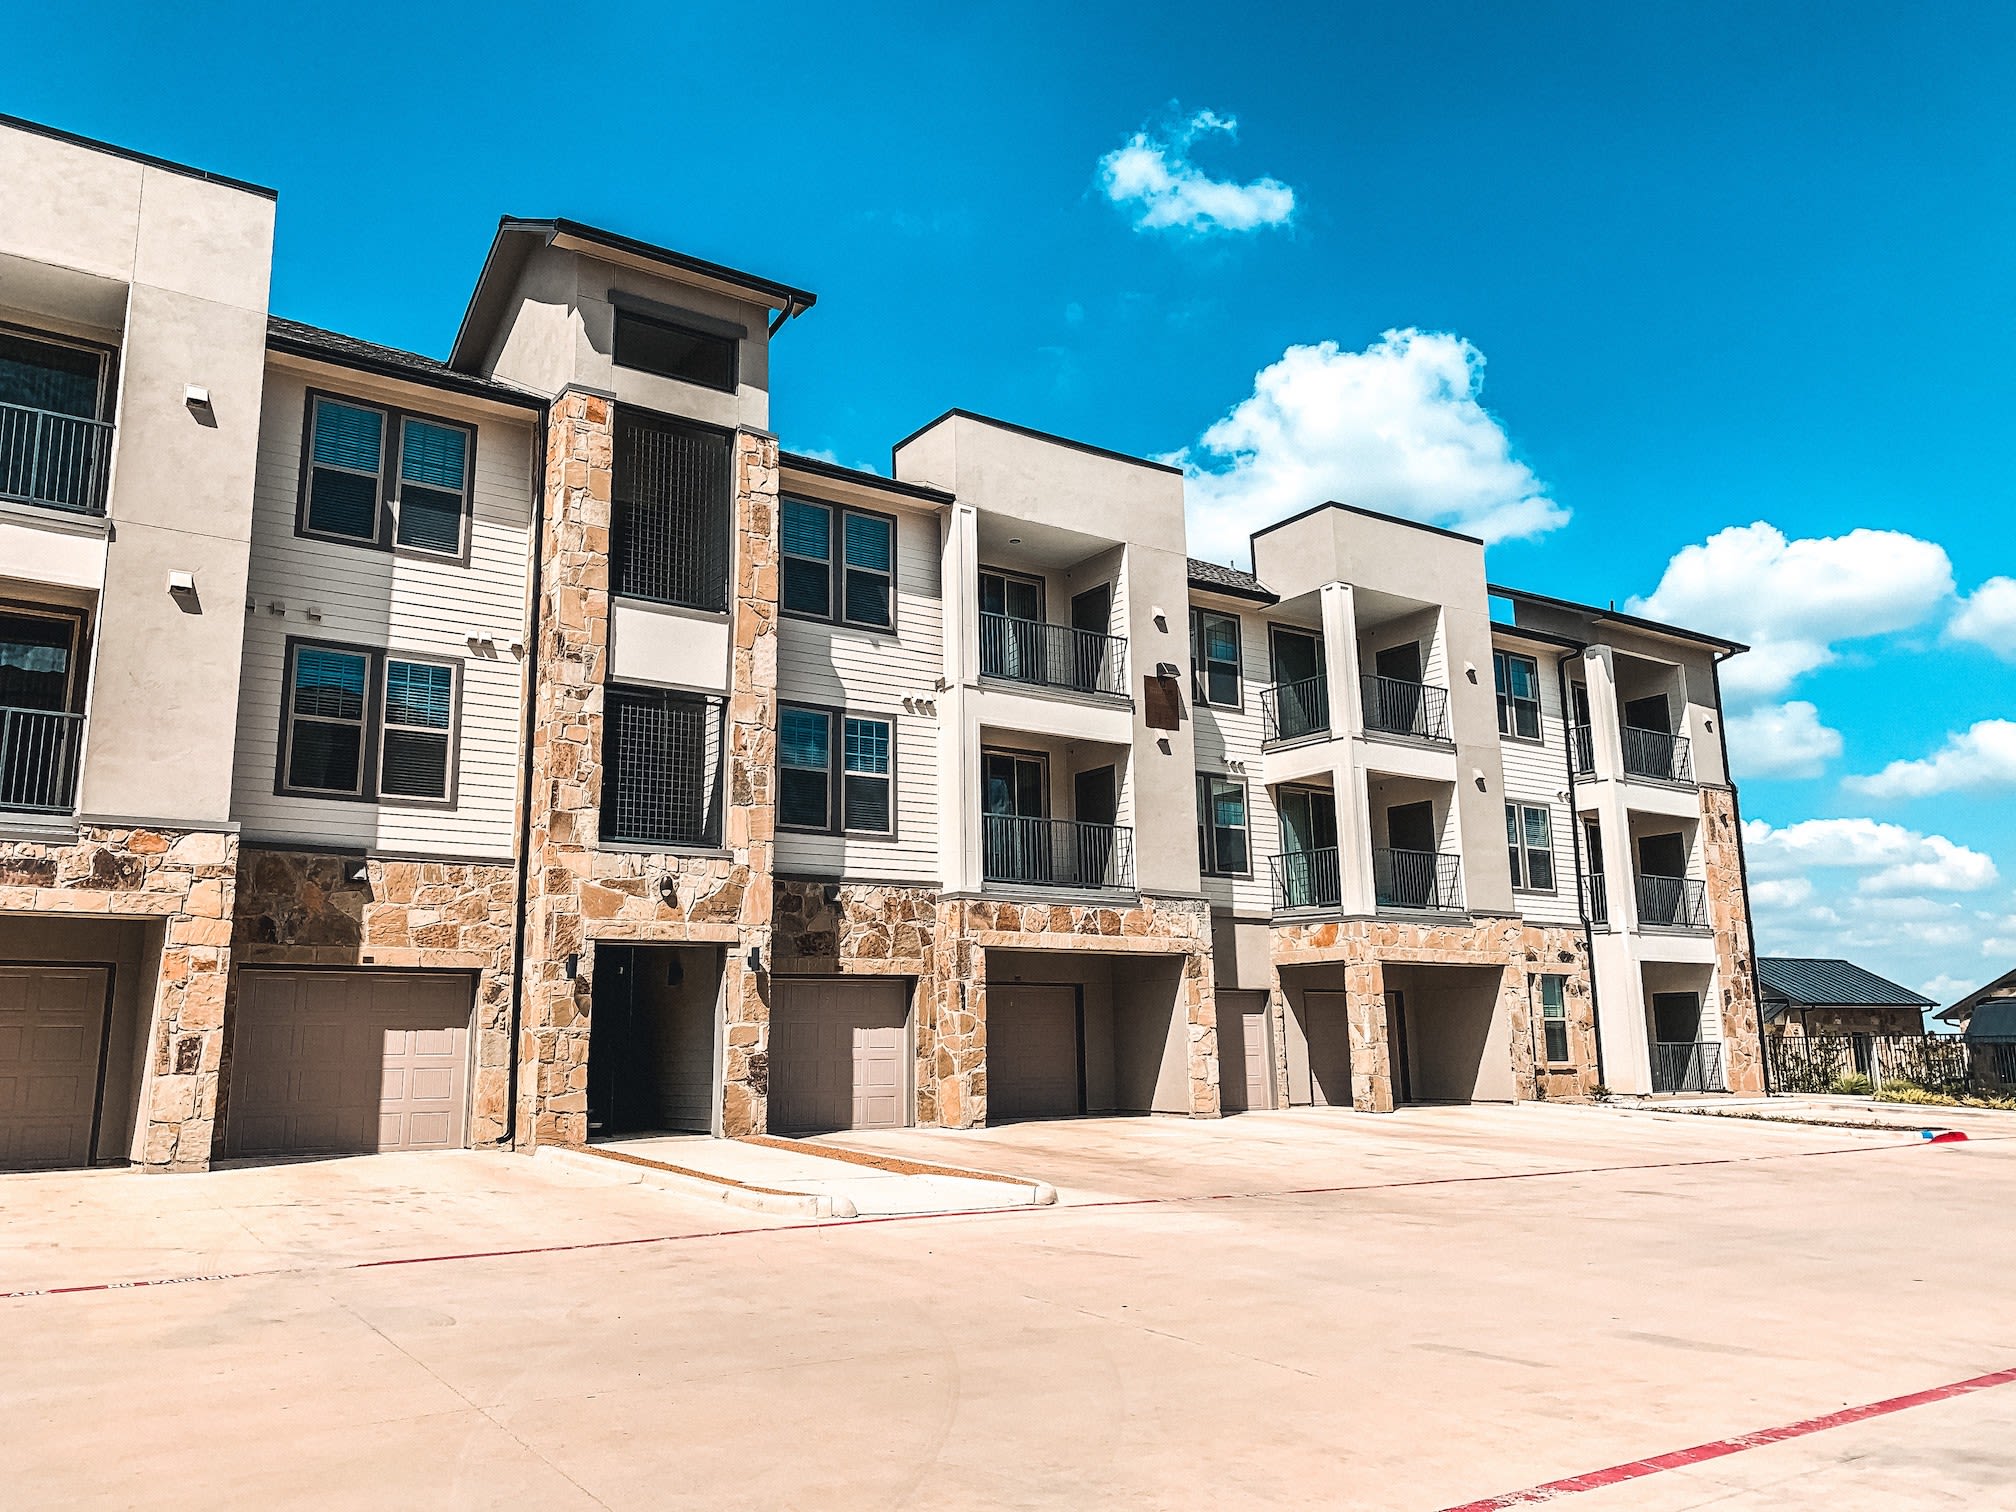 Exterior of our apartments at The Trails at Summer Creek in Fort Worth, Texas